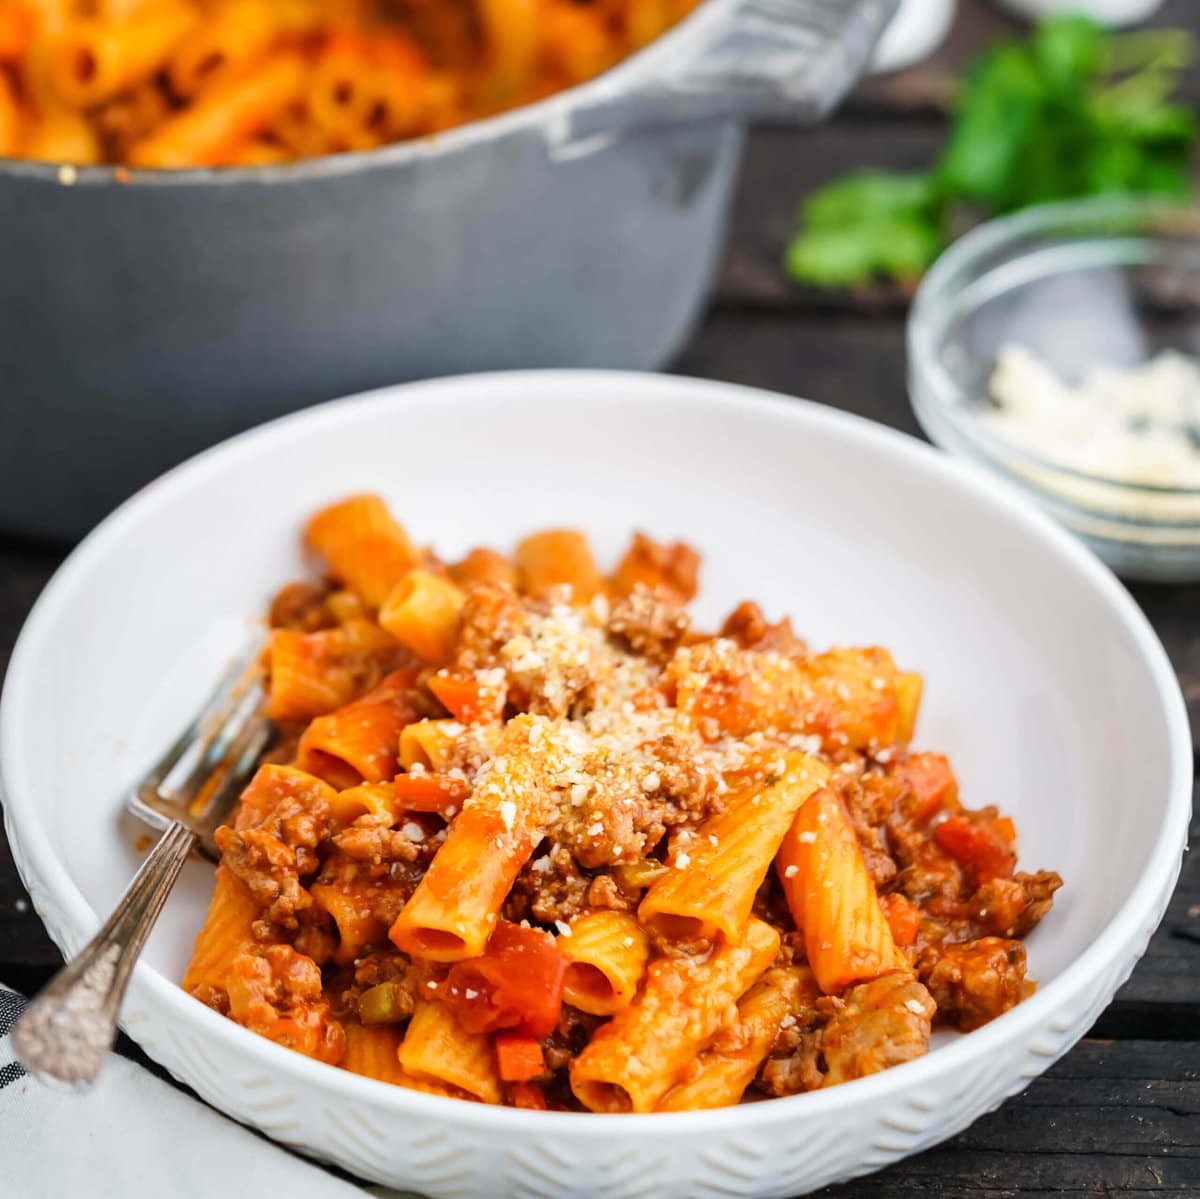 Rigatoni Bolognese in bowl with fork.